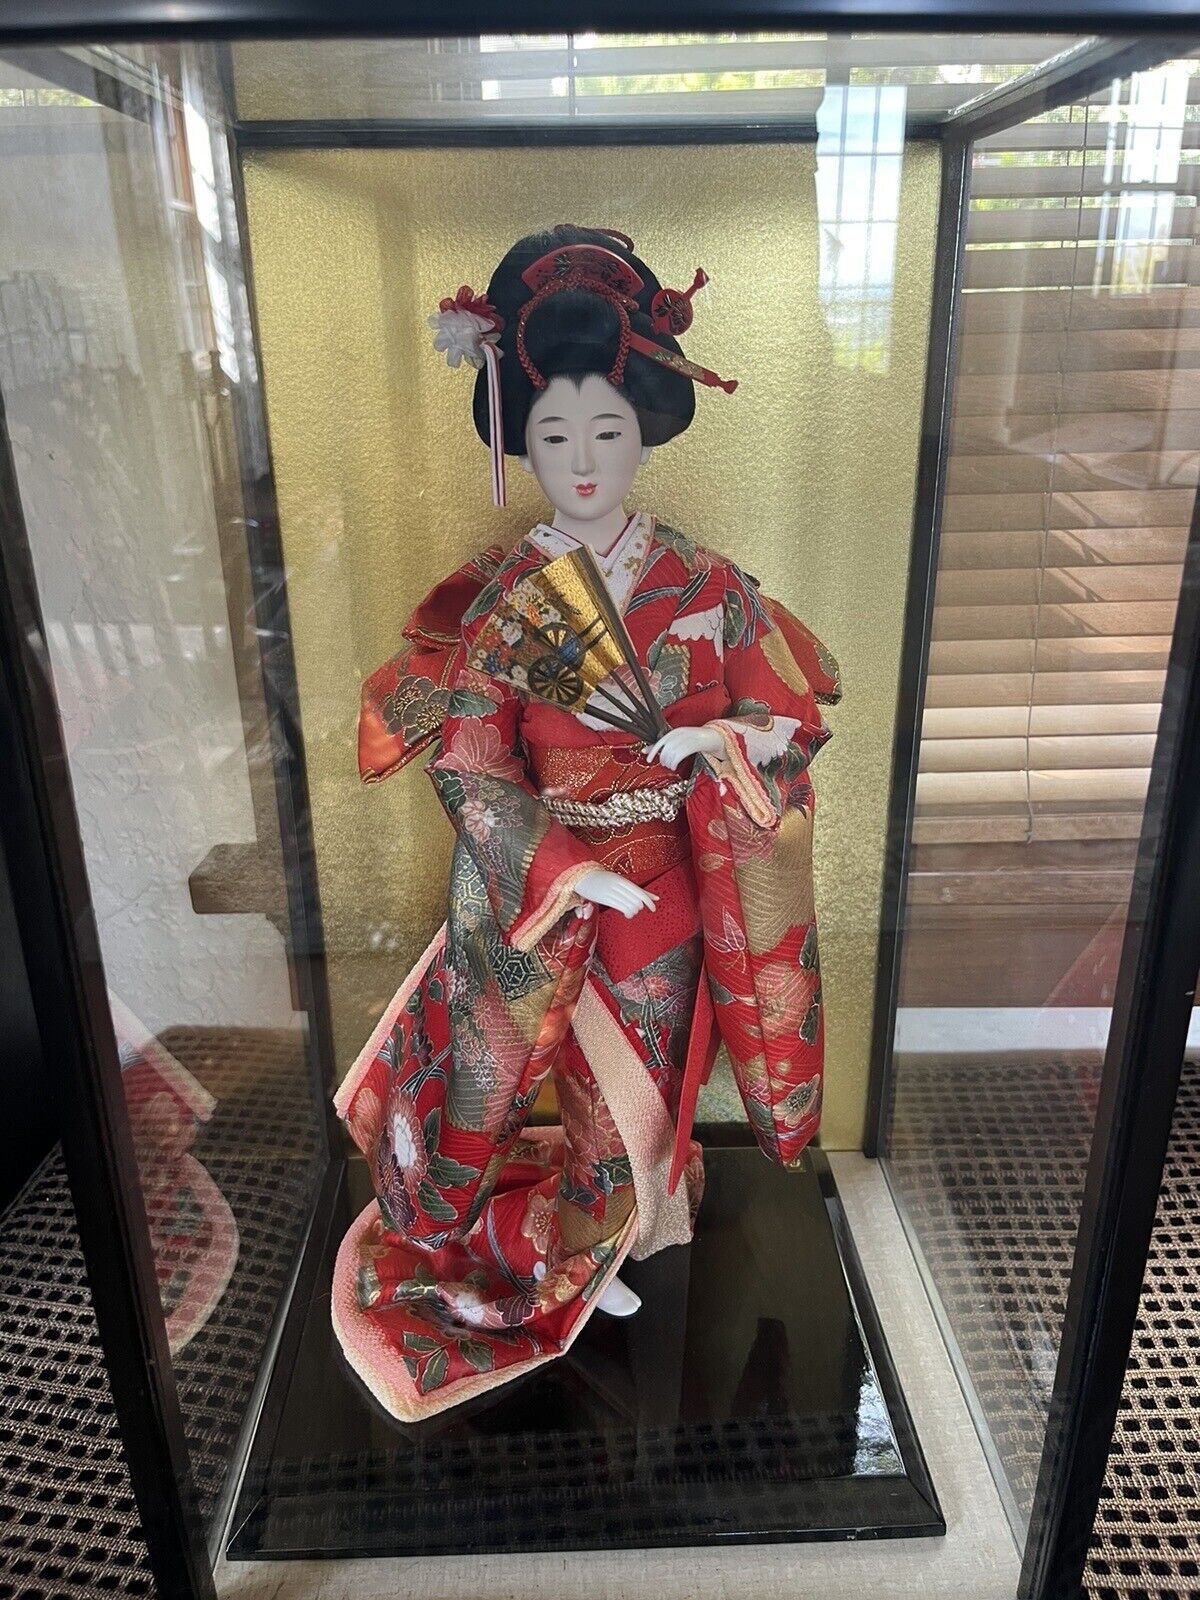 Vintage Japanese Geisha Doll In Glass Wood Case Box Is 20x12x10”